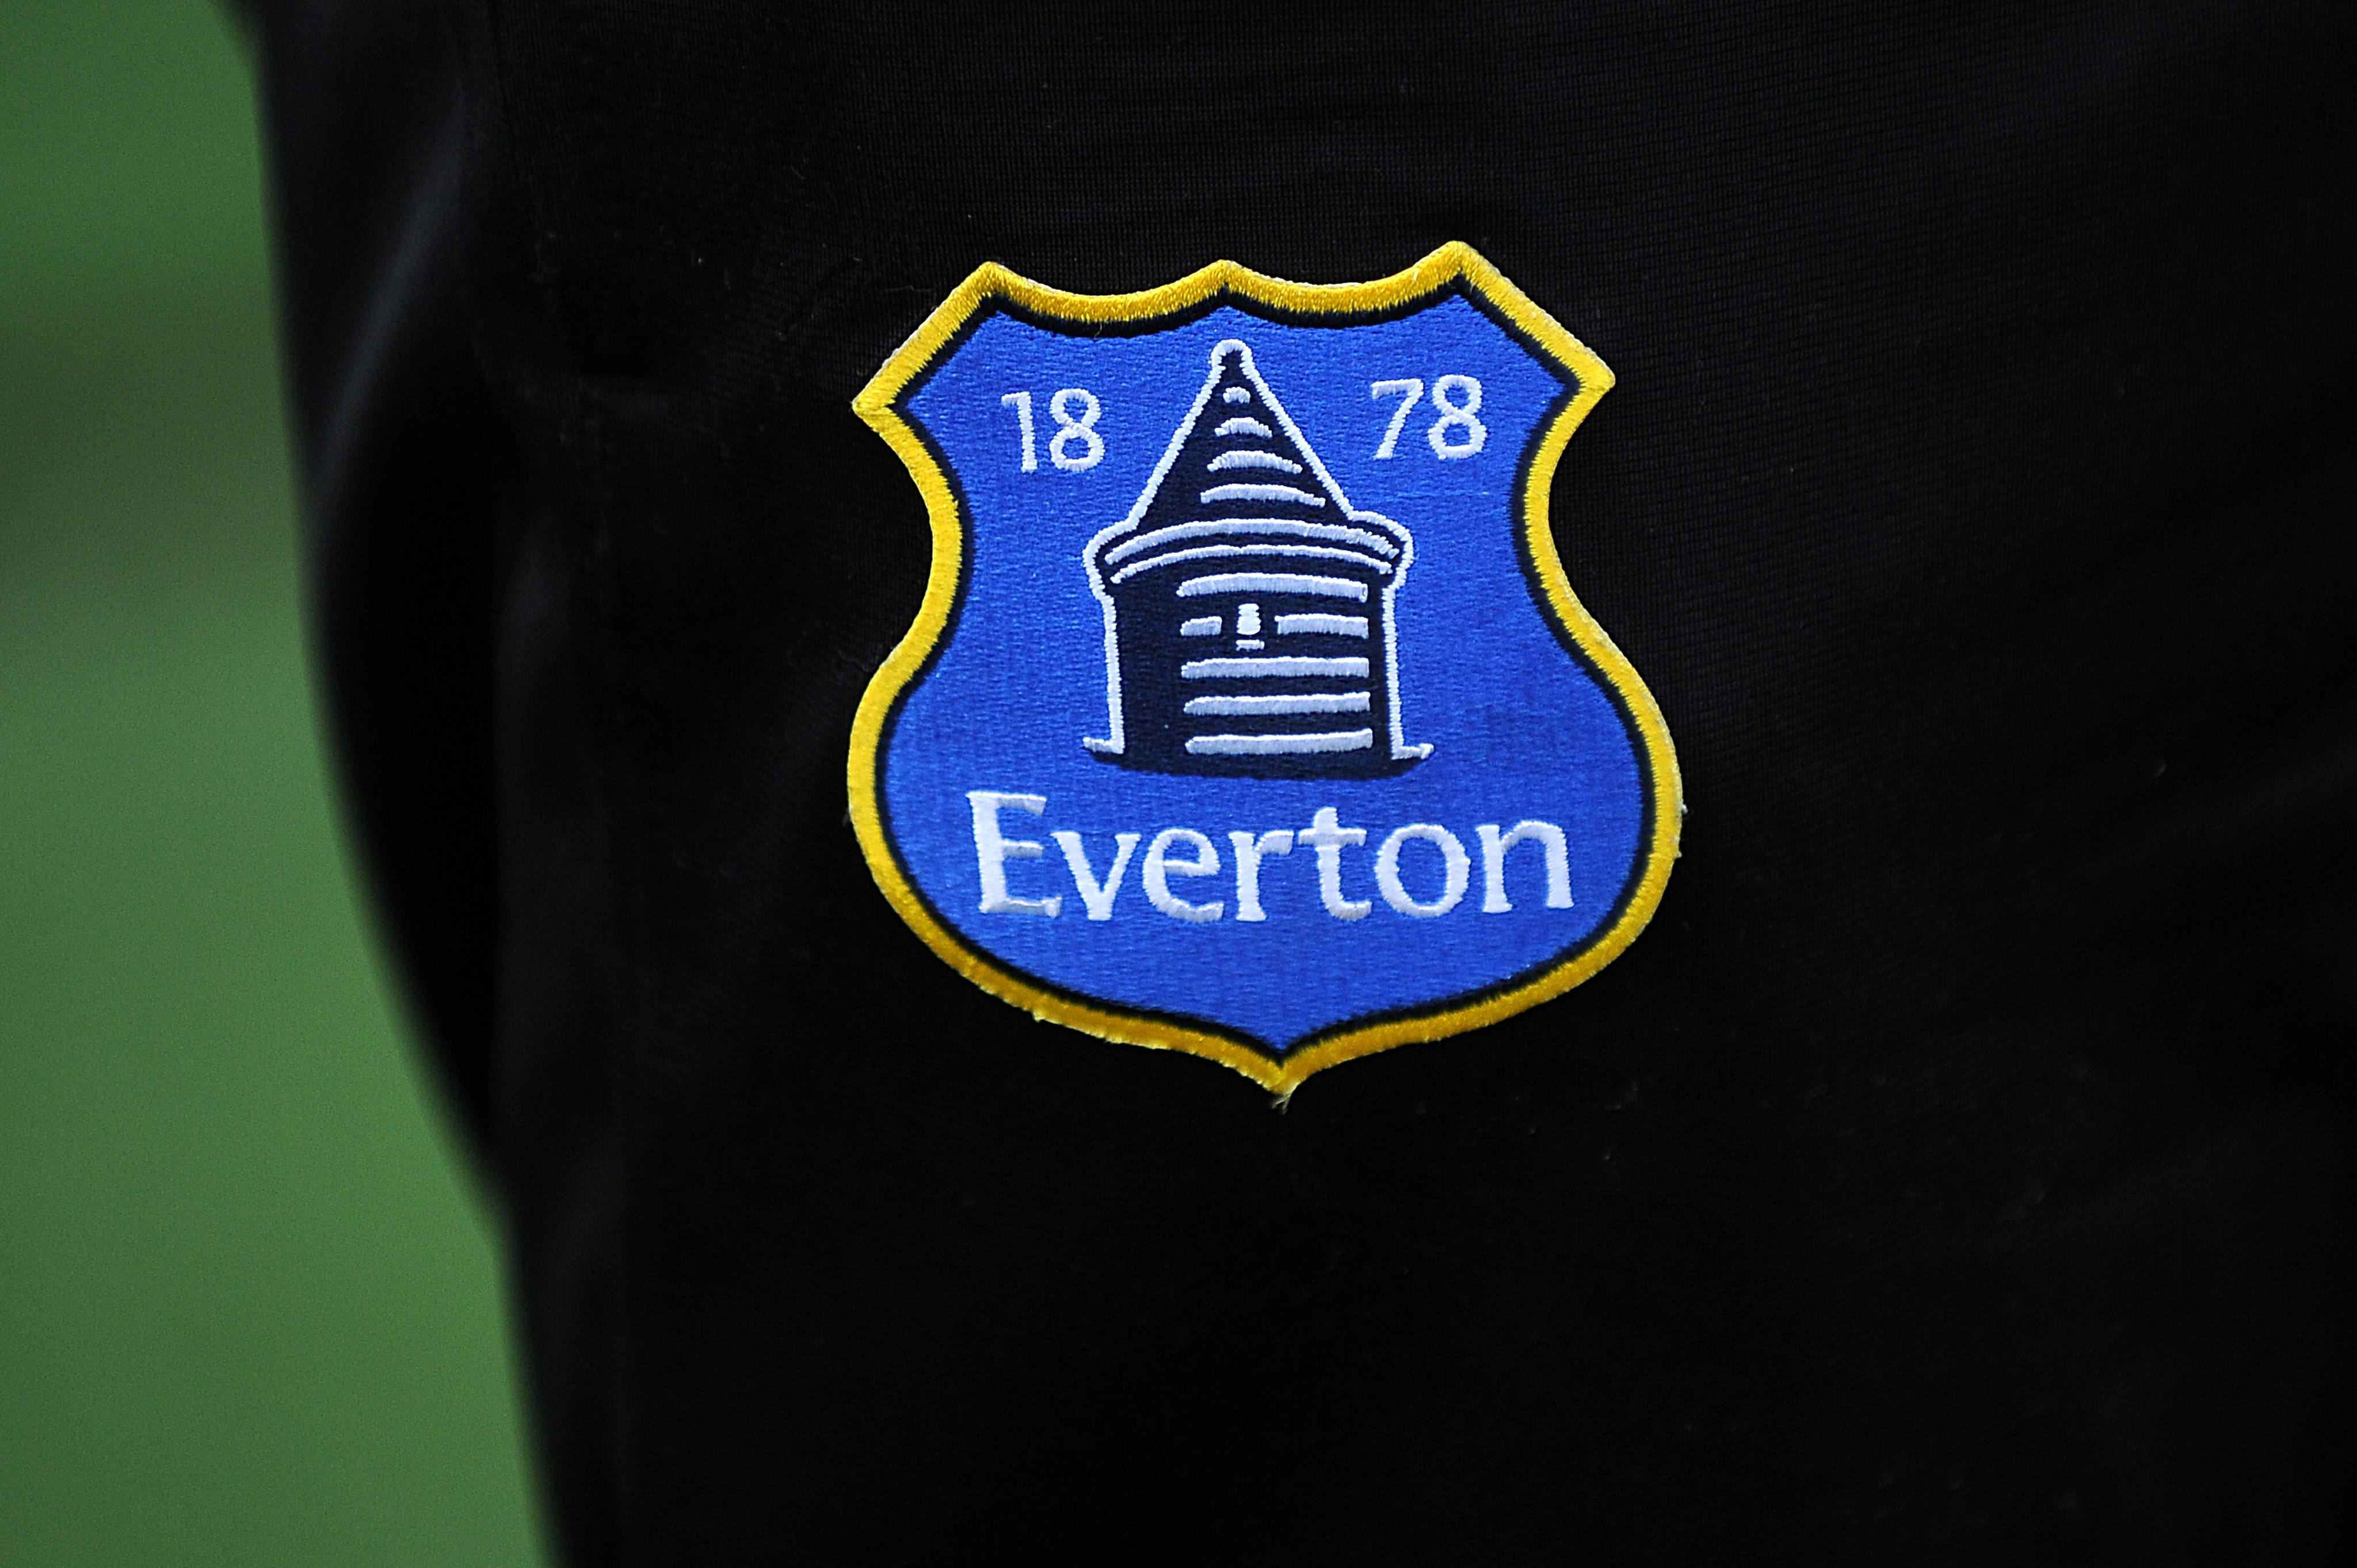 An Everton badge on the shorts of a player